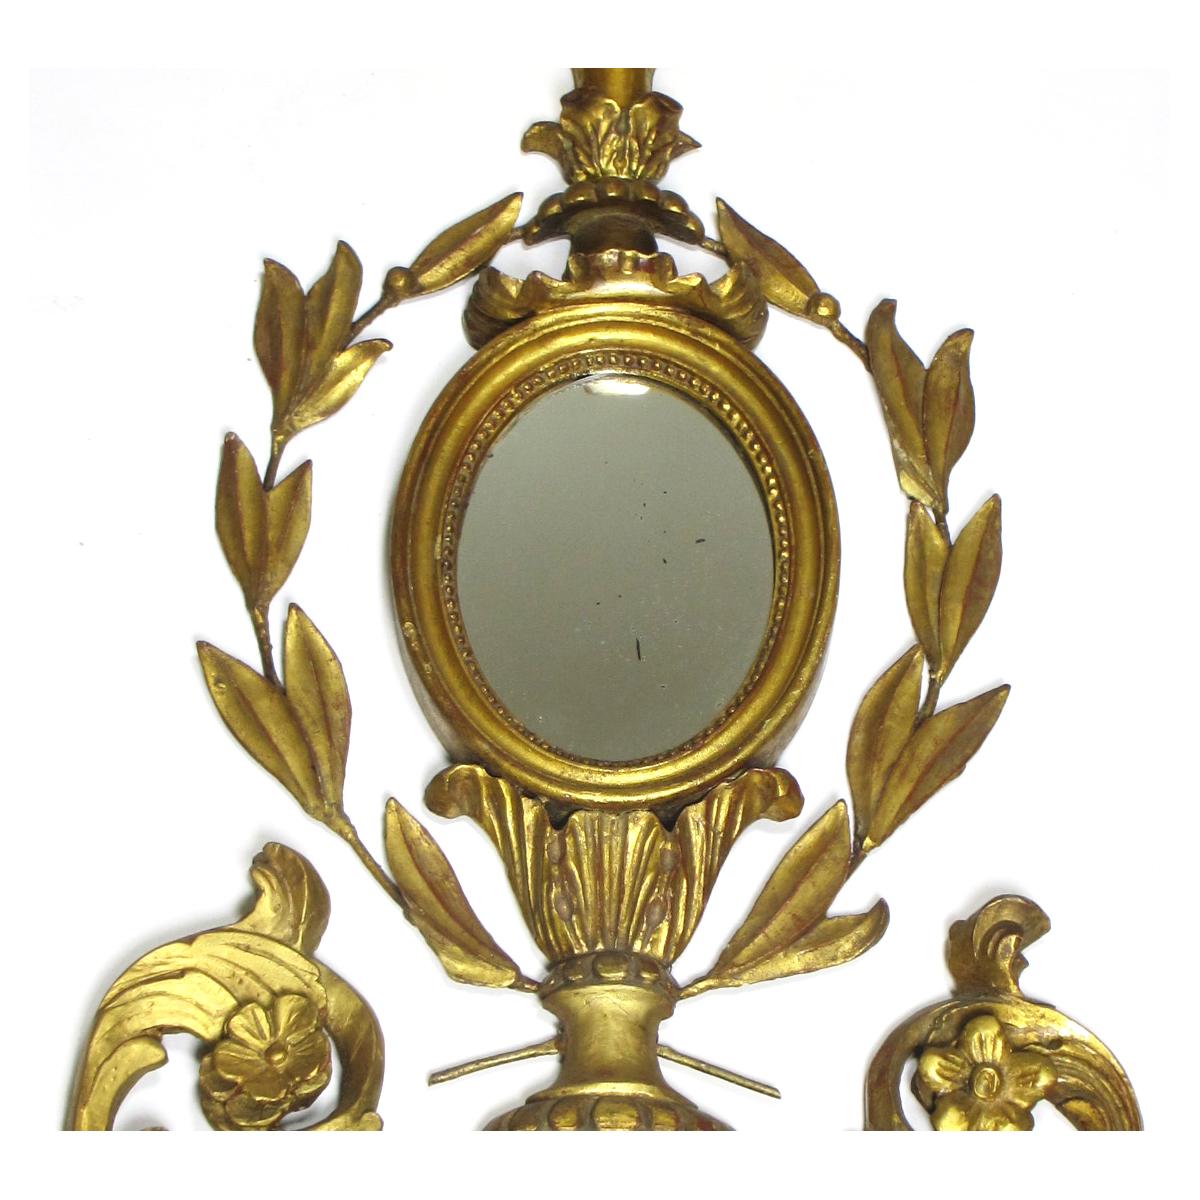 A fine French 19th/20th century Louis XVI style belle epoque gildwood carved sconce mirror (wall-light) Girandle. The elongated carved body decorated with giltwood carved wreaths, flowers, sunbursts and finials, centered with an oval mirror and